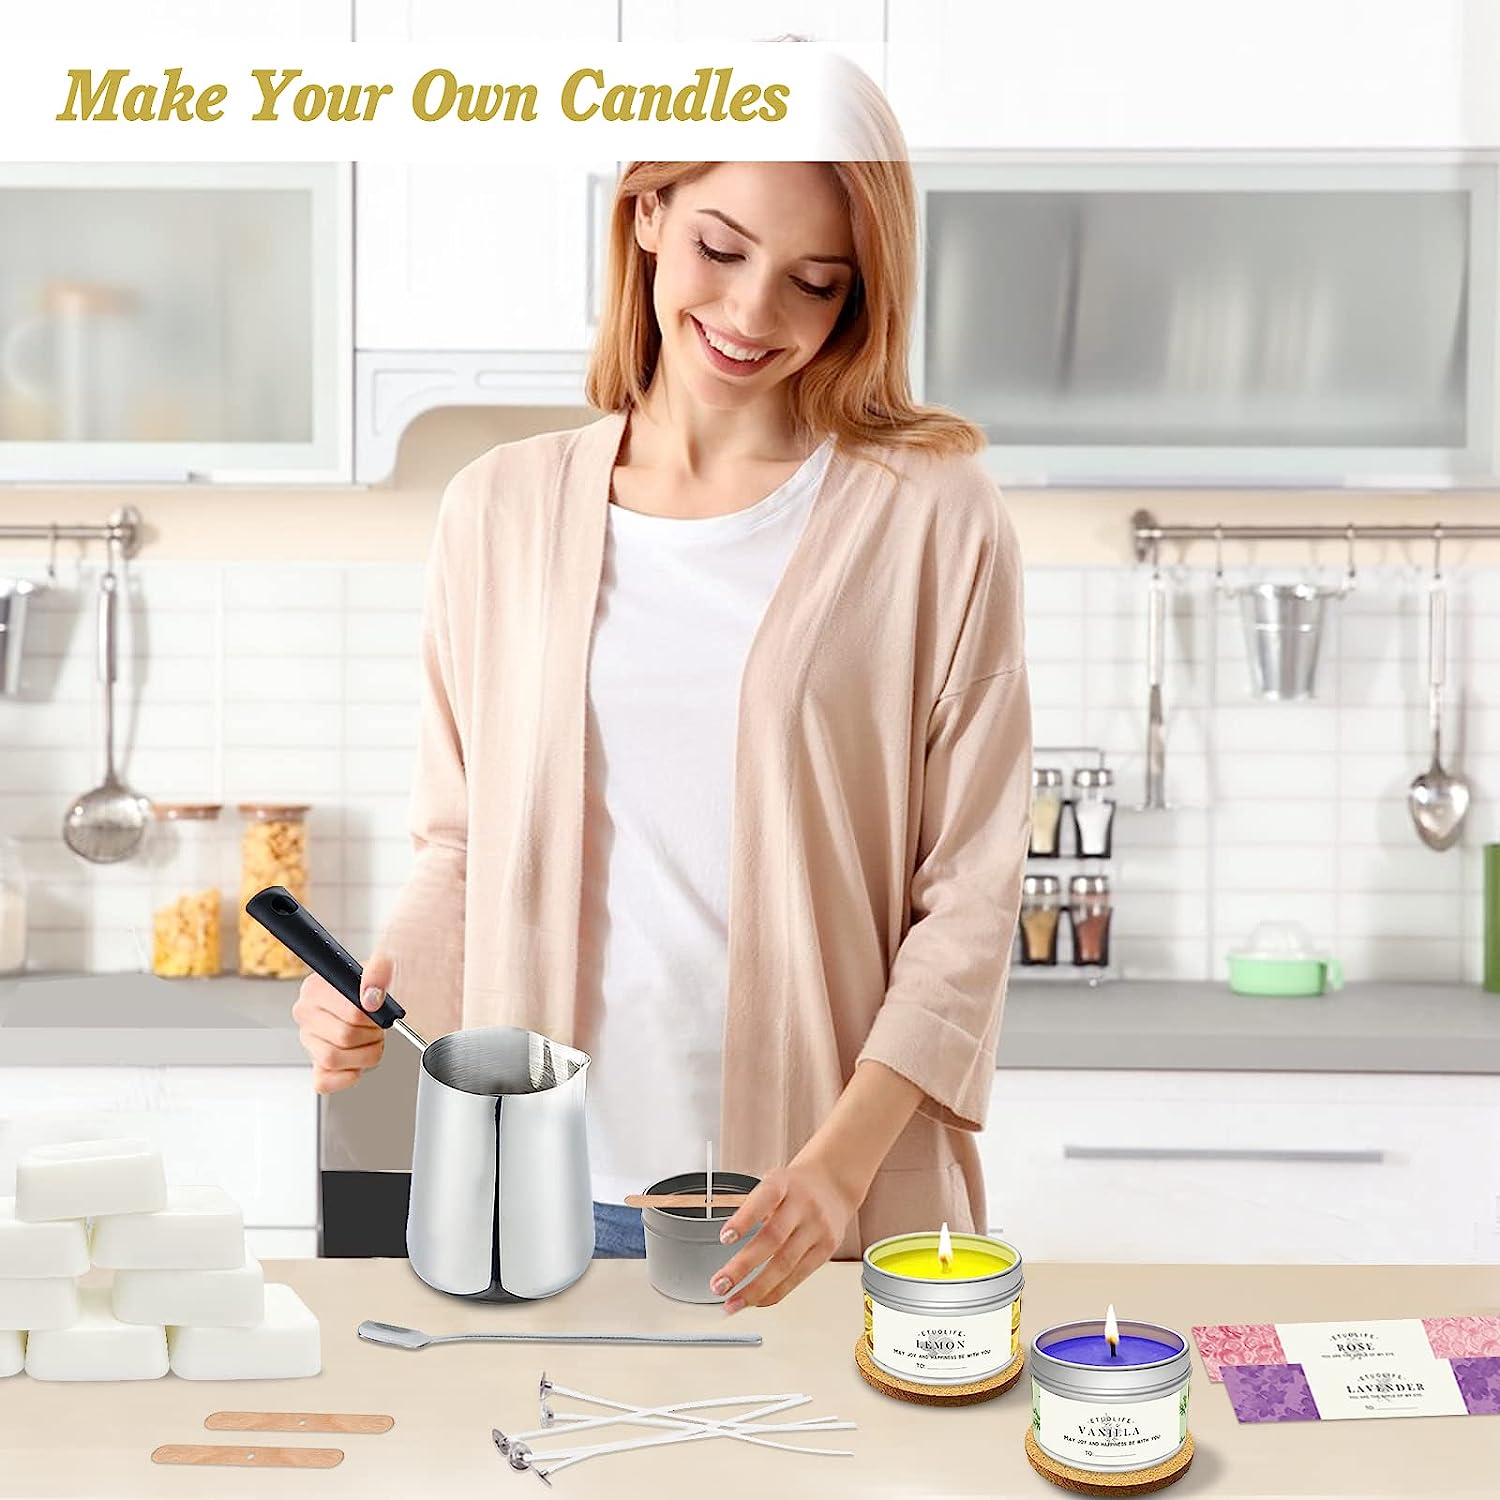 Candle Making Kit,Complete Candle Making Kits for Adults Kids,DIY Scented Candle Making Supplies Include Soy Wax for Candle Making,Scent Oils Wicks Dyes Candle Jars Melting Pot,Arts and Crafts Kits - image 5 of 9